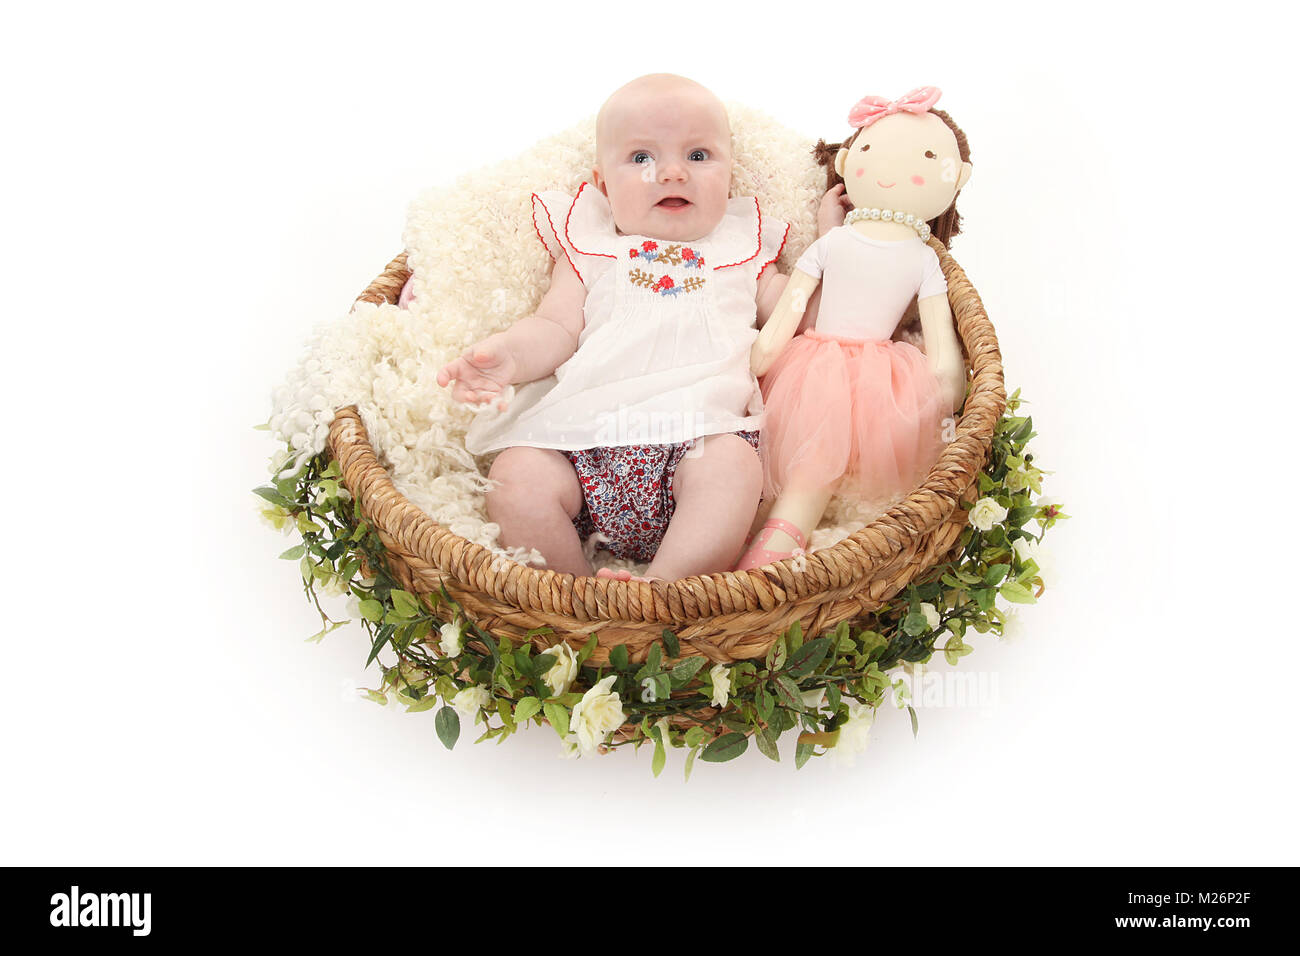 beautiful 3 month old baby girl happy playing in basket with dolly Stock Photo